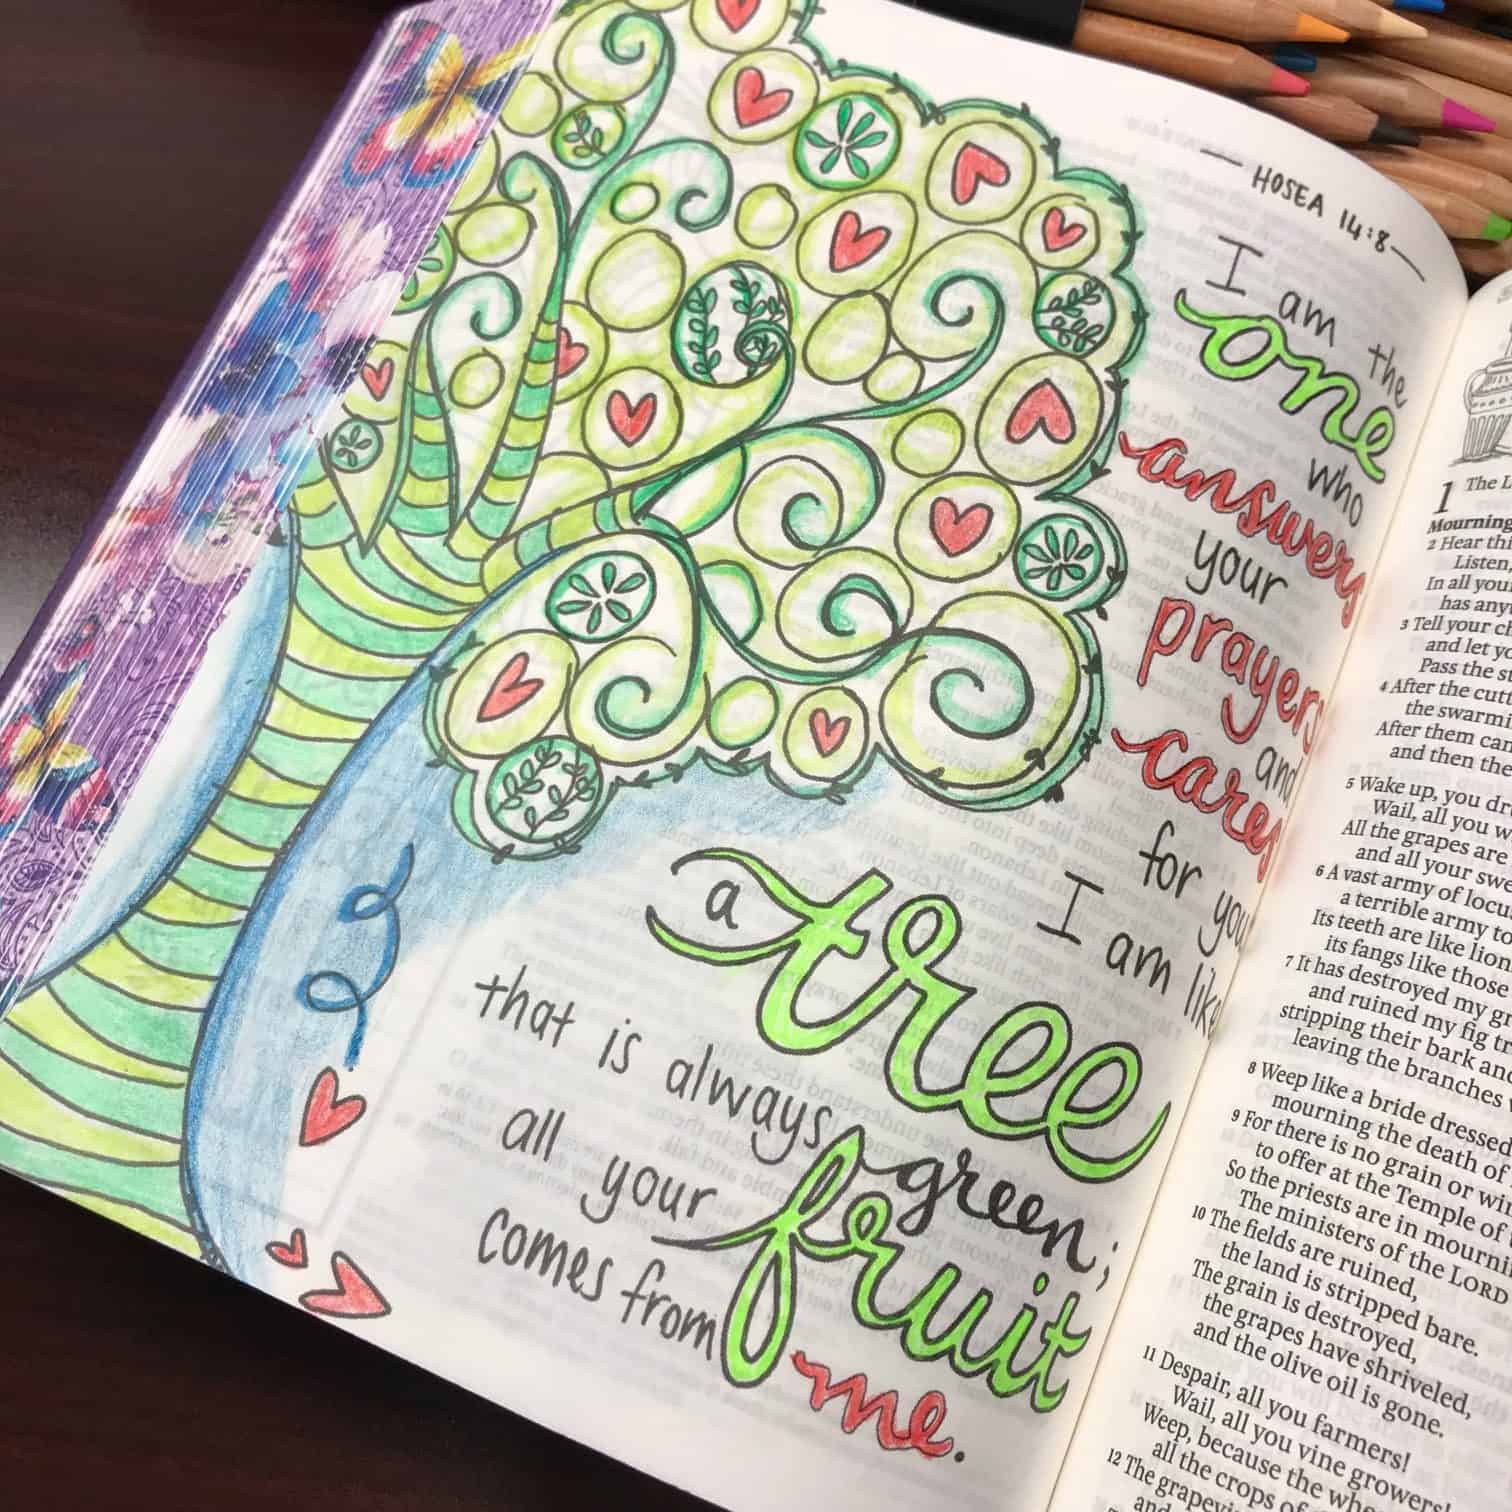 My Creative Bible | All Your Fruit Comes From Me - My Creative Bible